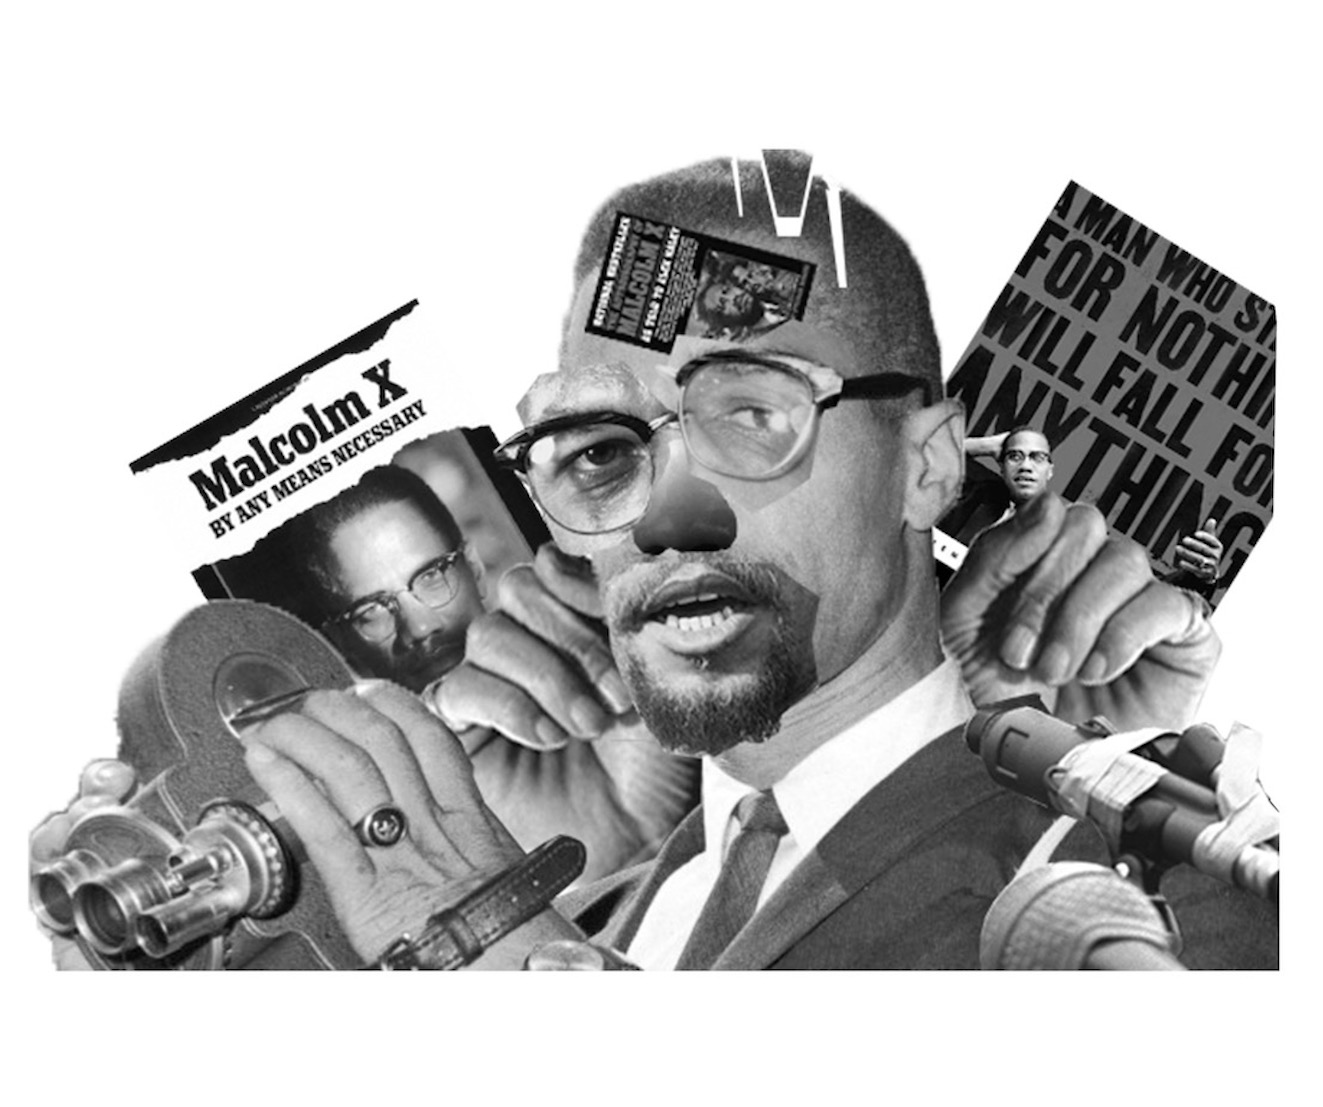 thumbnail of Malcolm X Cubist Portrait by Karlvin Danois. Medium: Digital collage. Size 9 x 12 inches Date 2020